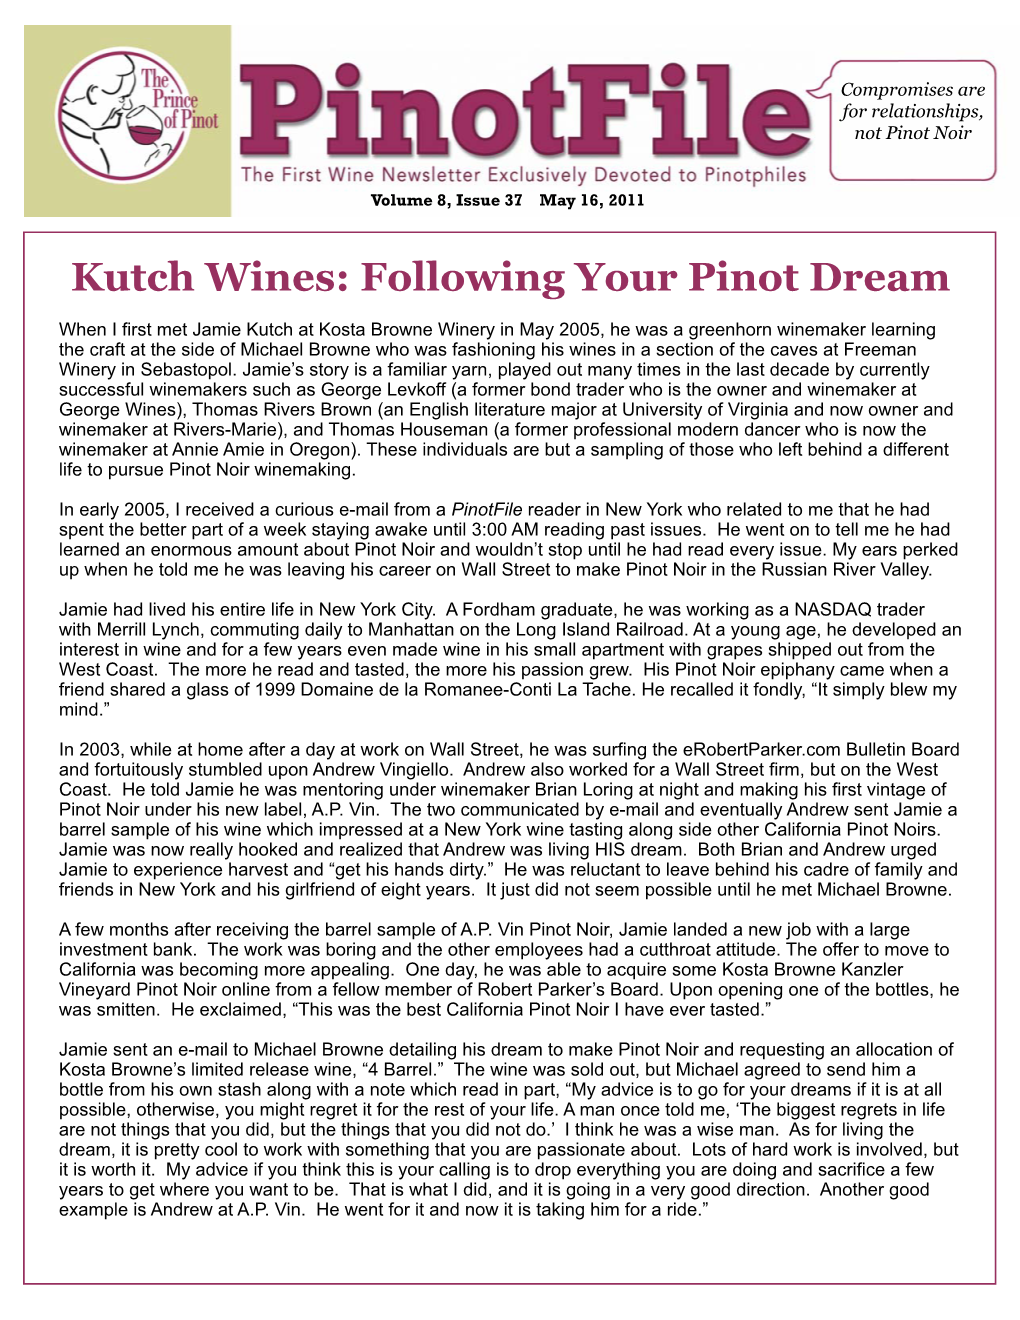 Kutch Wines: Following Your Pinot Dream